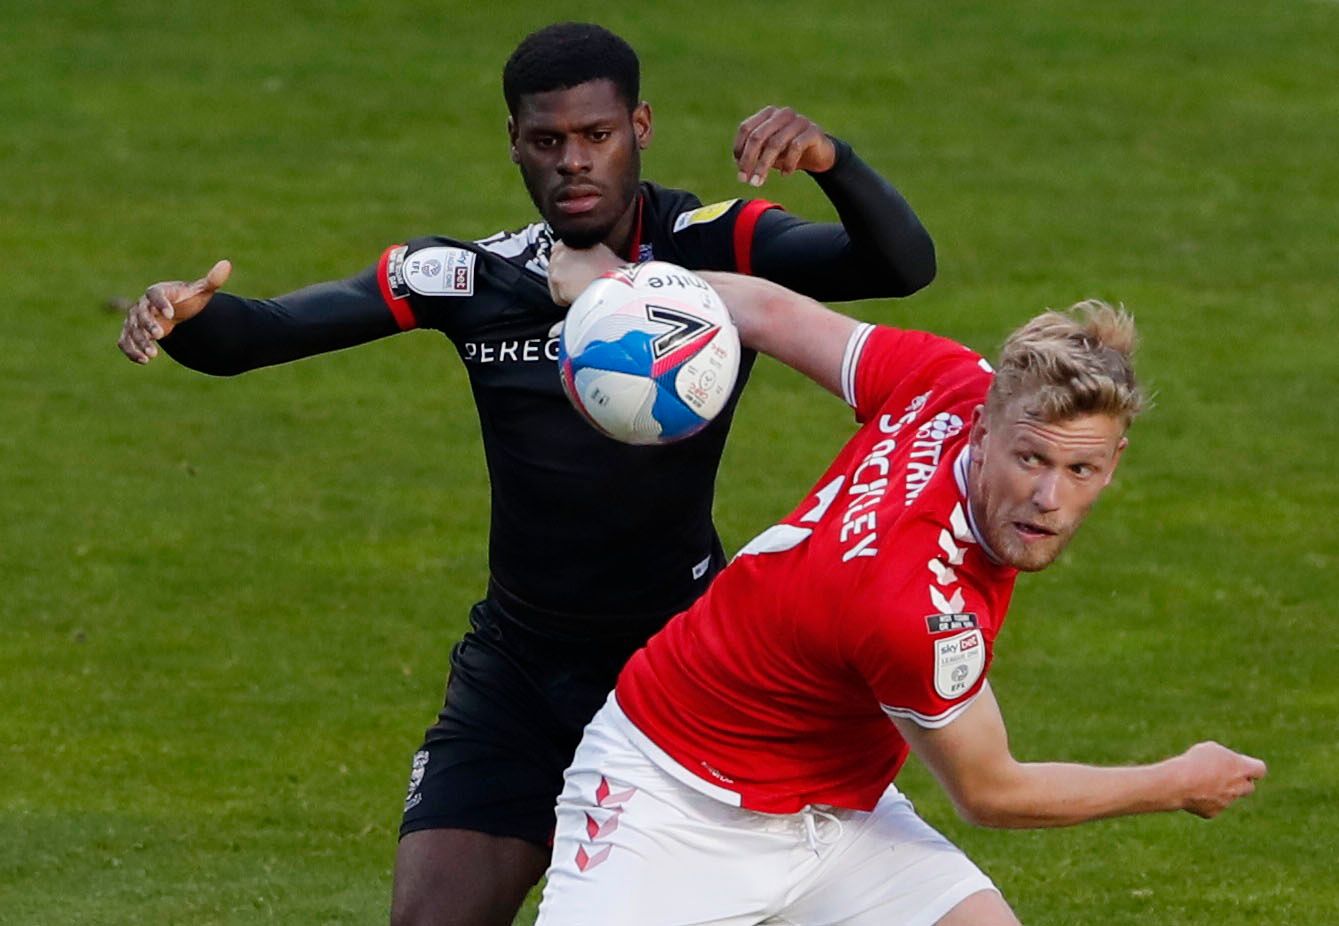 Soccer Football - League One - Charlton Athletic v Lincoln City - The Valley, London, Britain - May 4, 2021 Lincoln City's Timothy Eyoma in action with Charlton Athletic's Jayden Stockley Action Images/Andrew Couldridge EDITORIAL USE ONLY. No use with unauthorized audio, video, data, fixture lists, club/league logos or 'live' services. Online in-match use limited to 75 images, no video emulation. No use in betting, games or single club /league/player publications.  Please contact your account re